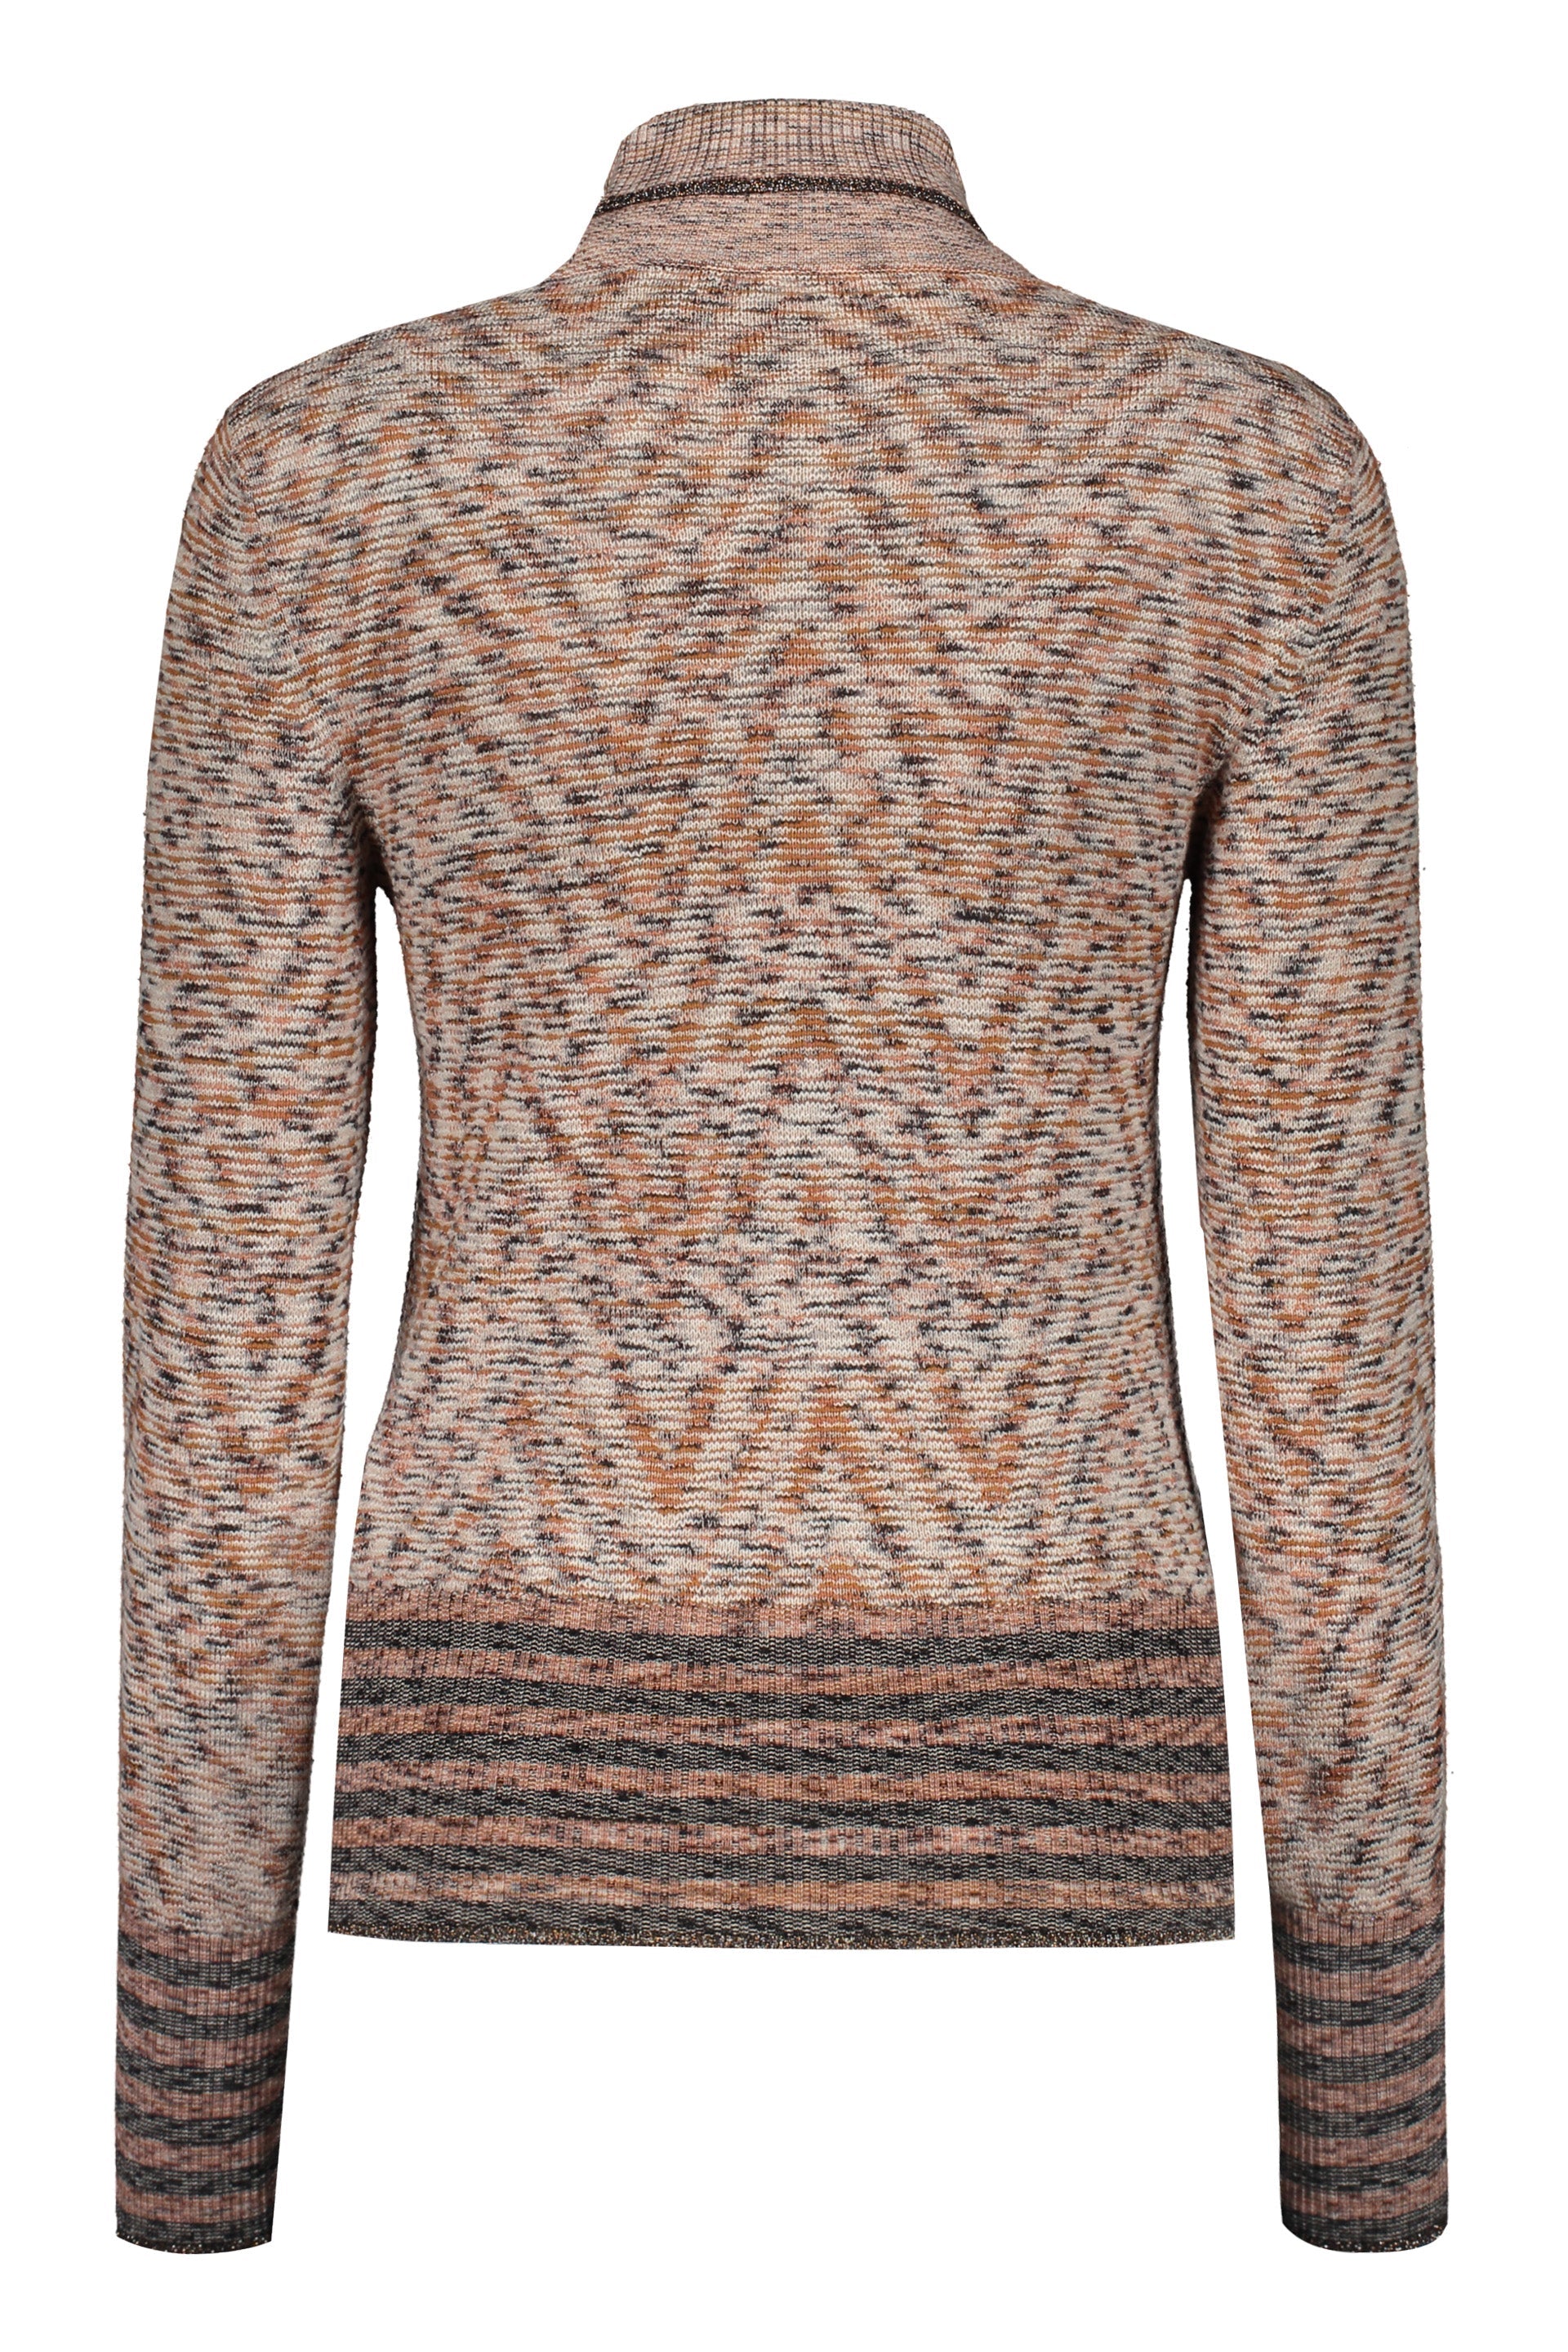 Missoni-OUTLET-SALE-Wool-turtleneck-sweater-Strick-40-ARCHIVE-COLLECTION-2.jpg